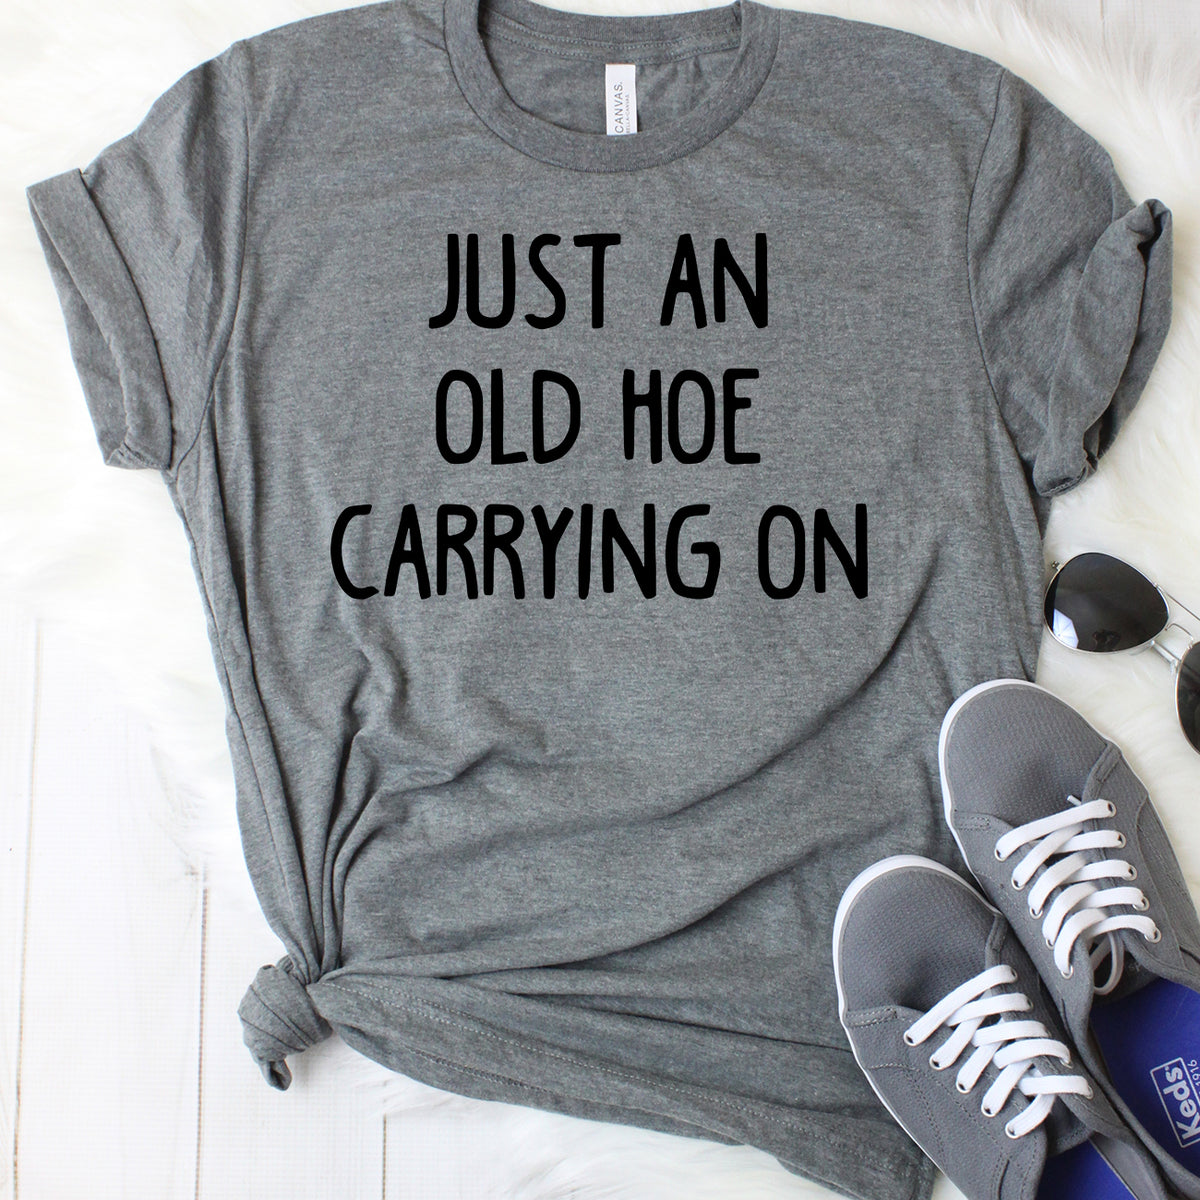 Just an Old Hoe Carrying On Dark Grey T-Shirt